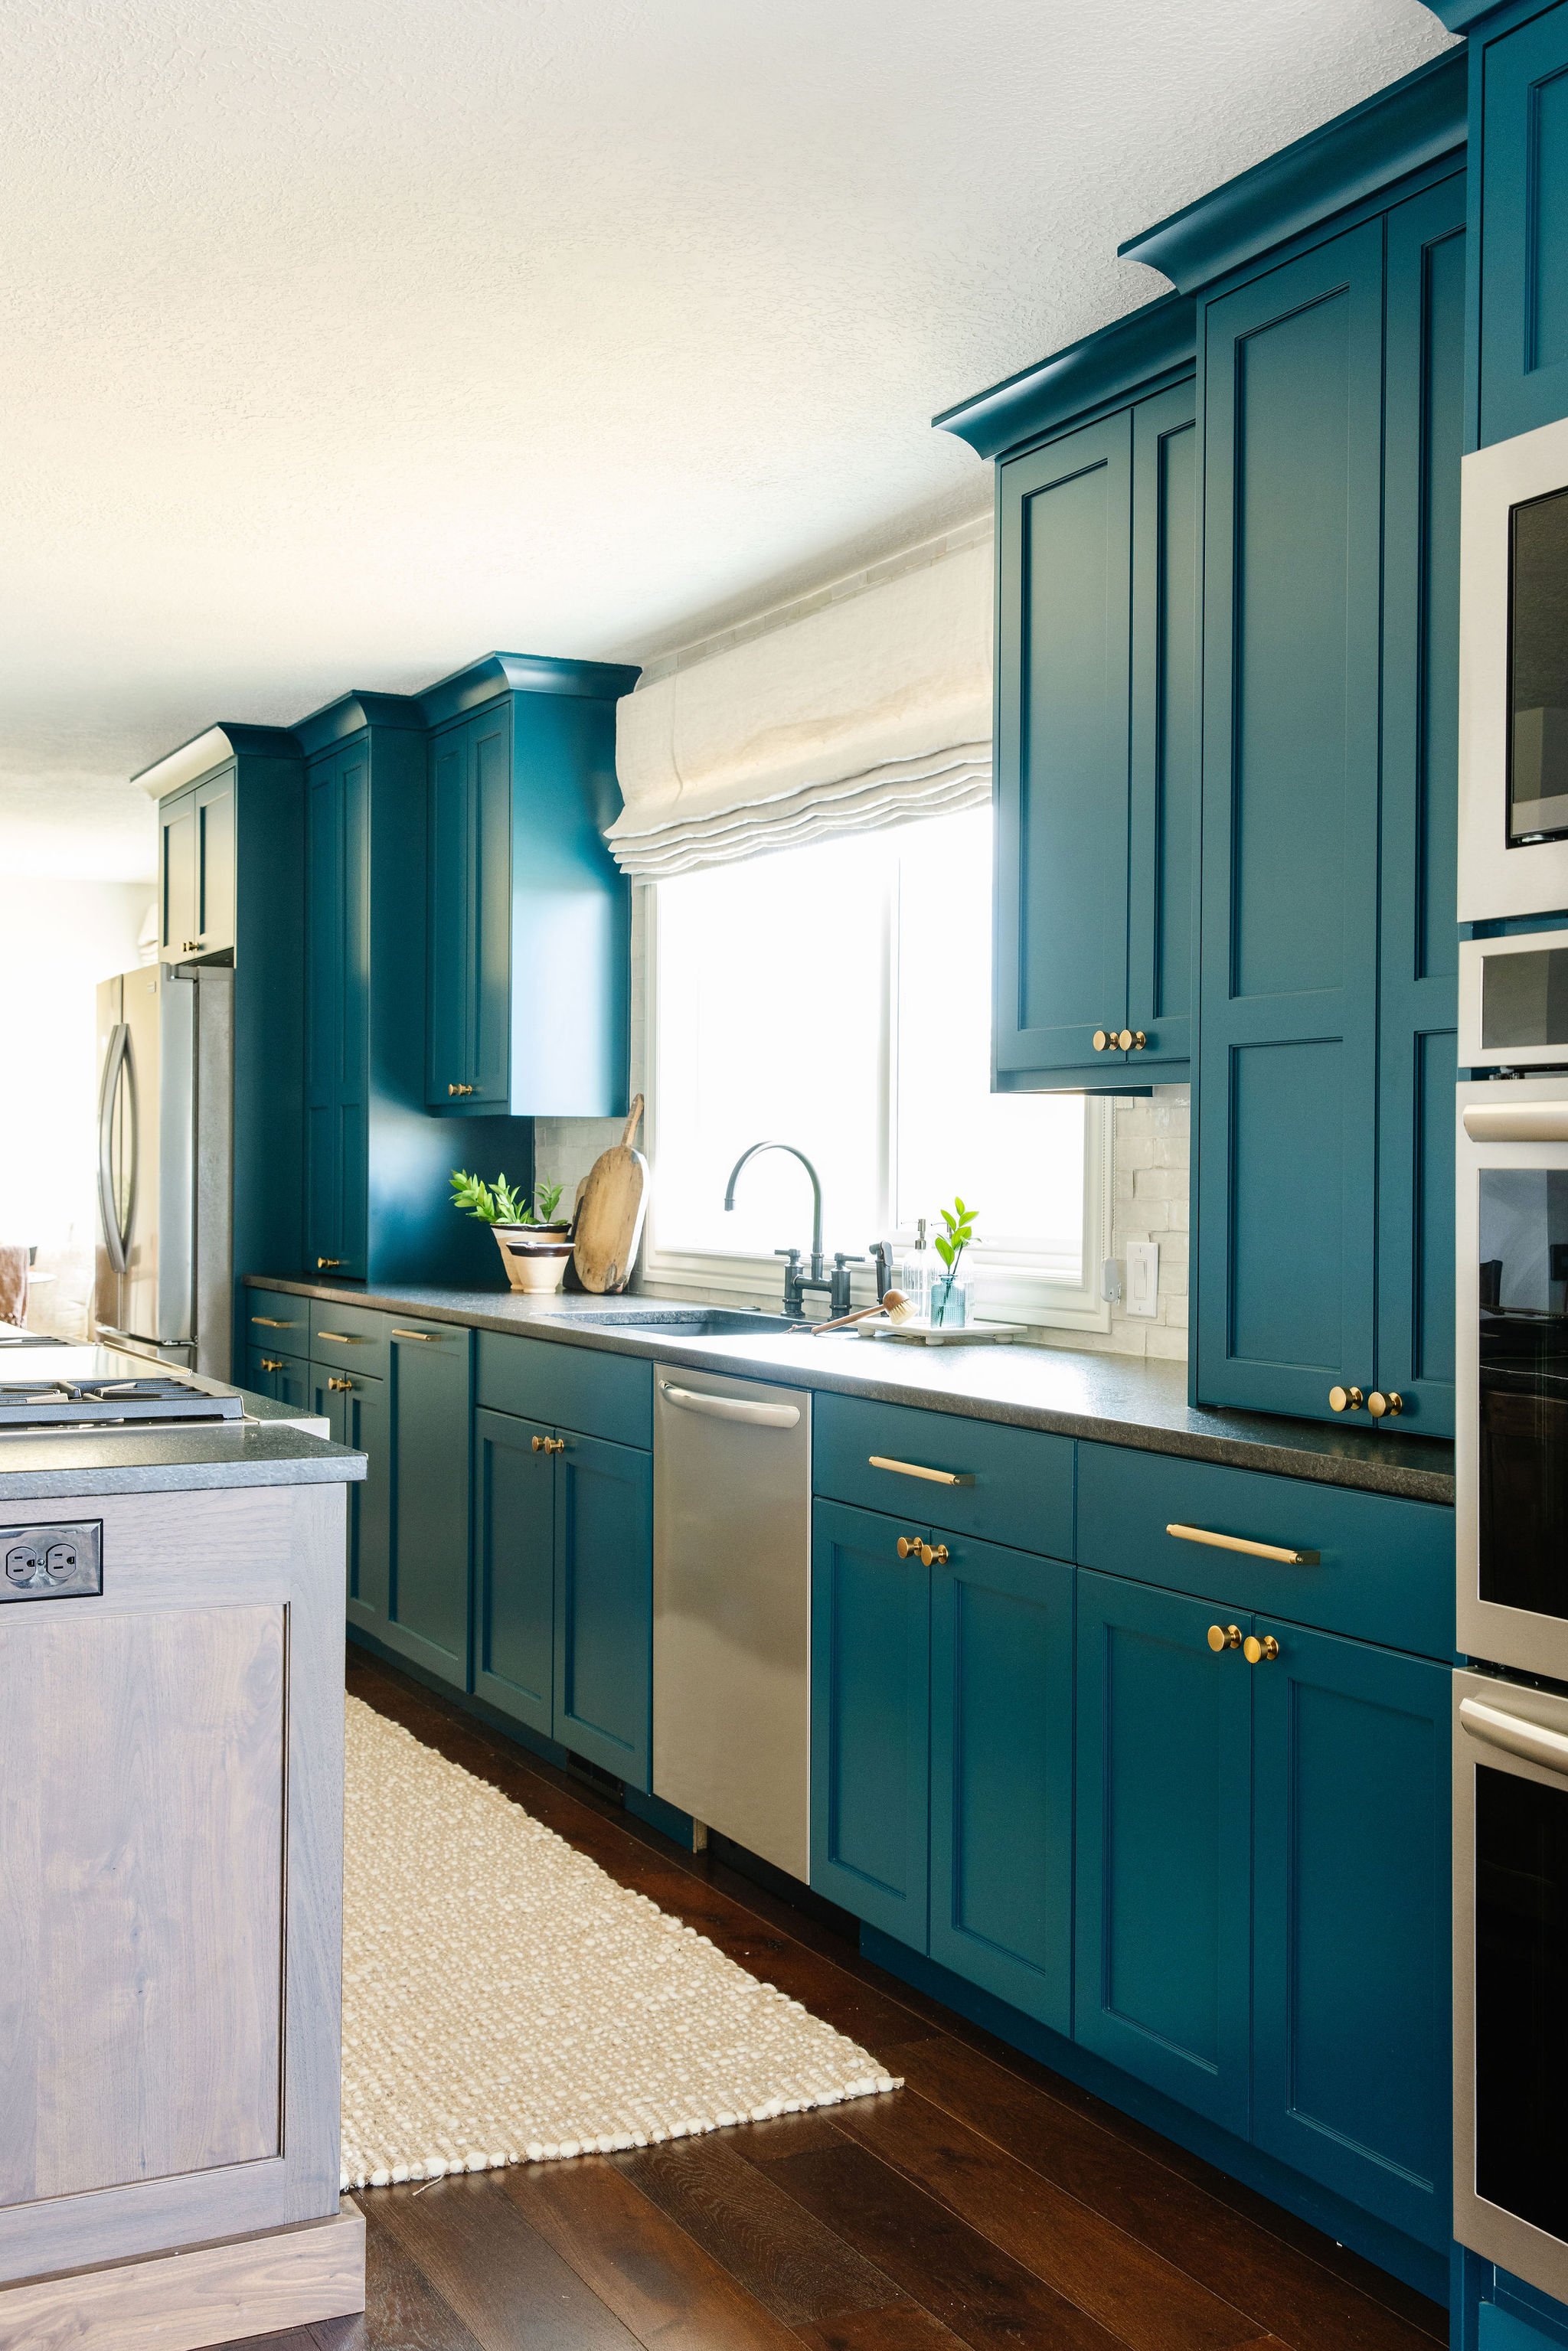  This modern kitchen features teal cabinets with gold handles designed by Logan, Utah interior designer Liz Powell. Teal cabinets gold hardware roman shades crown molding #colorfulcabinets #romanshades #modernkitchen #interiordesignkitchen 